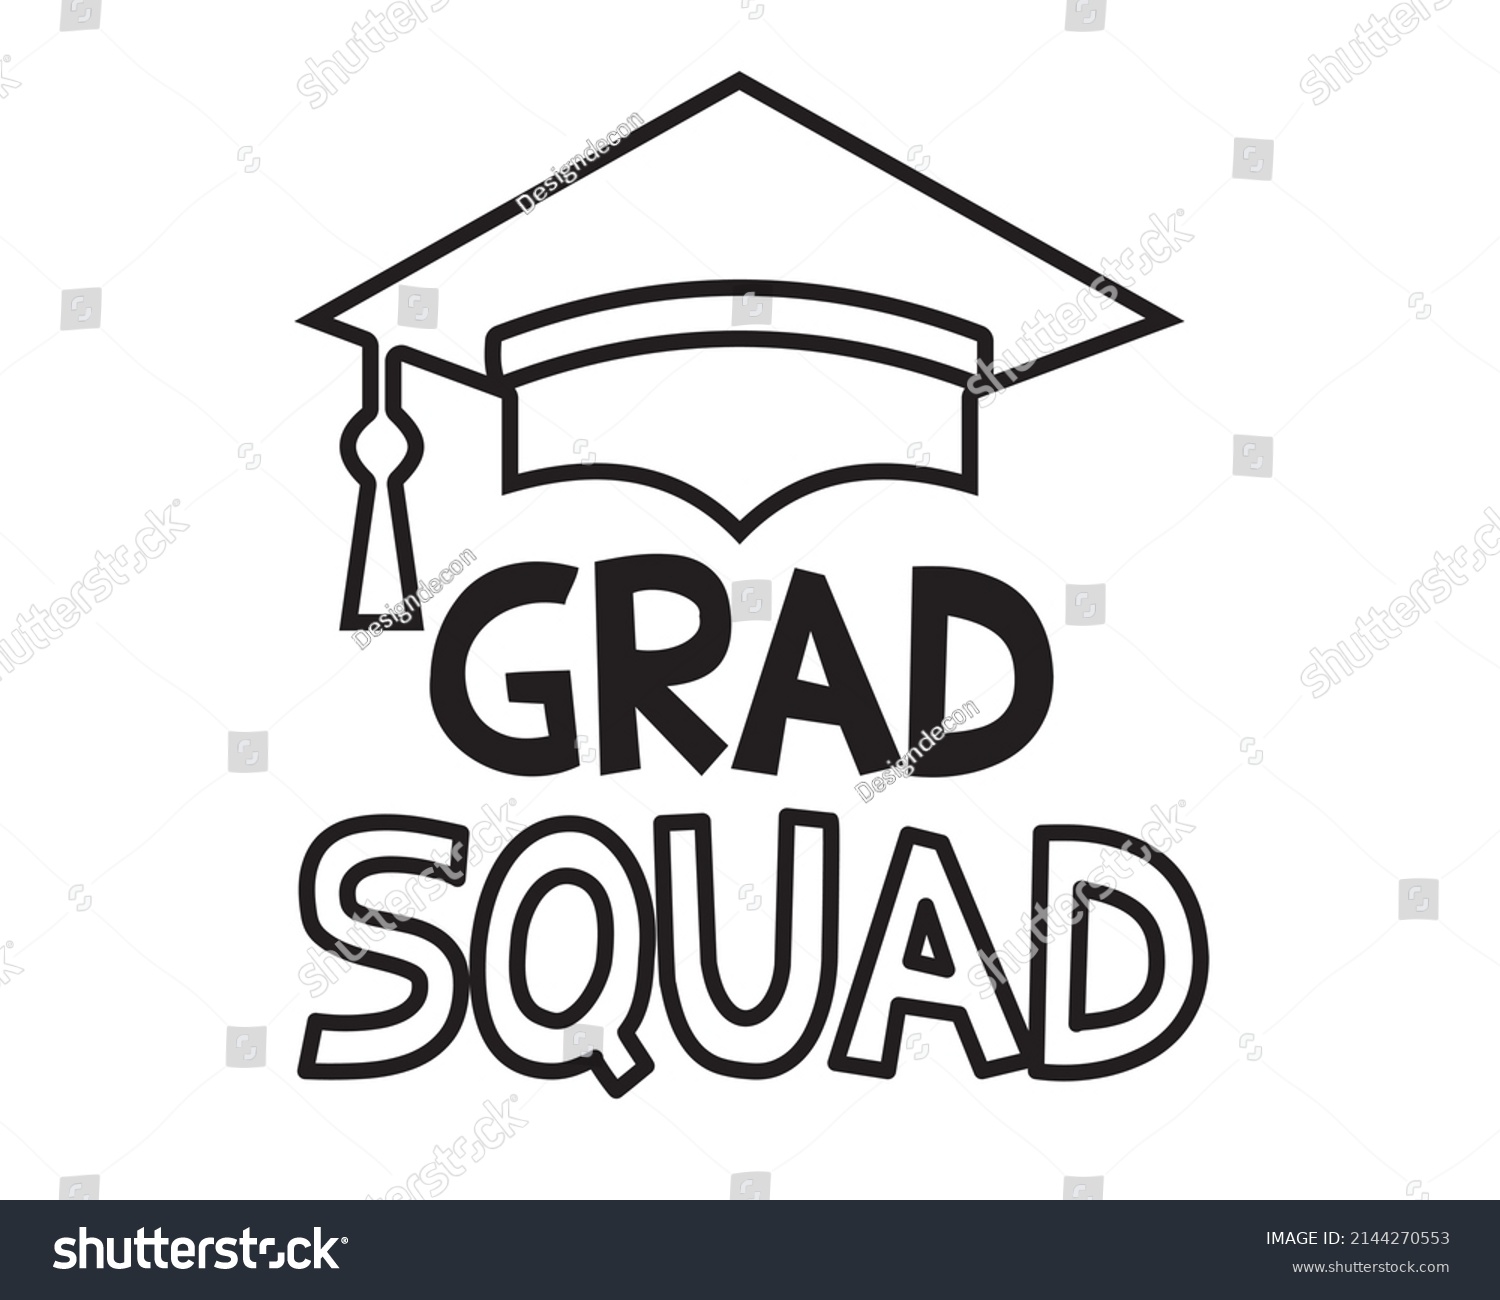 SVG of Grad squad - Graduation Quote Typography with white Background svg